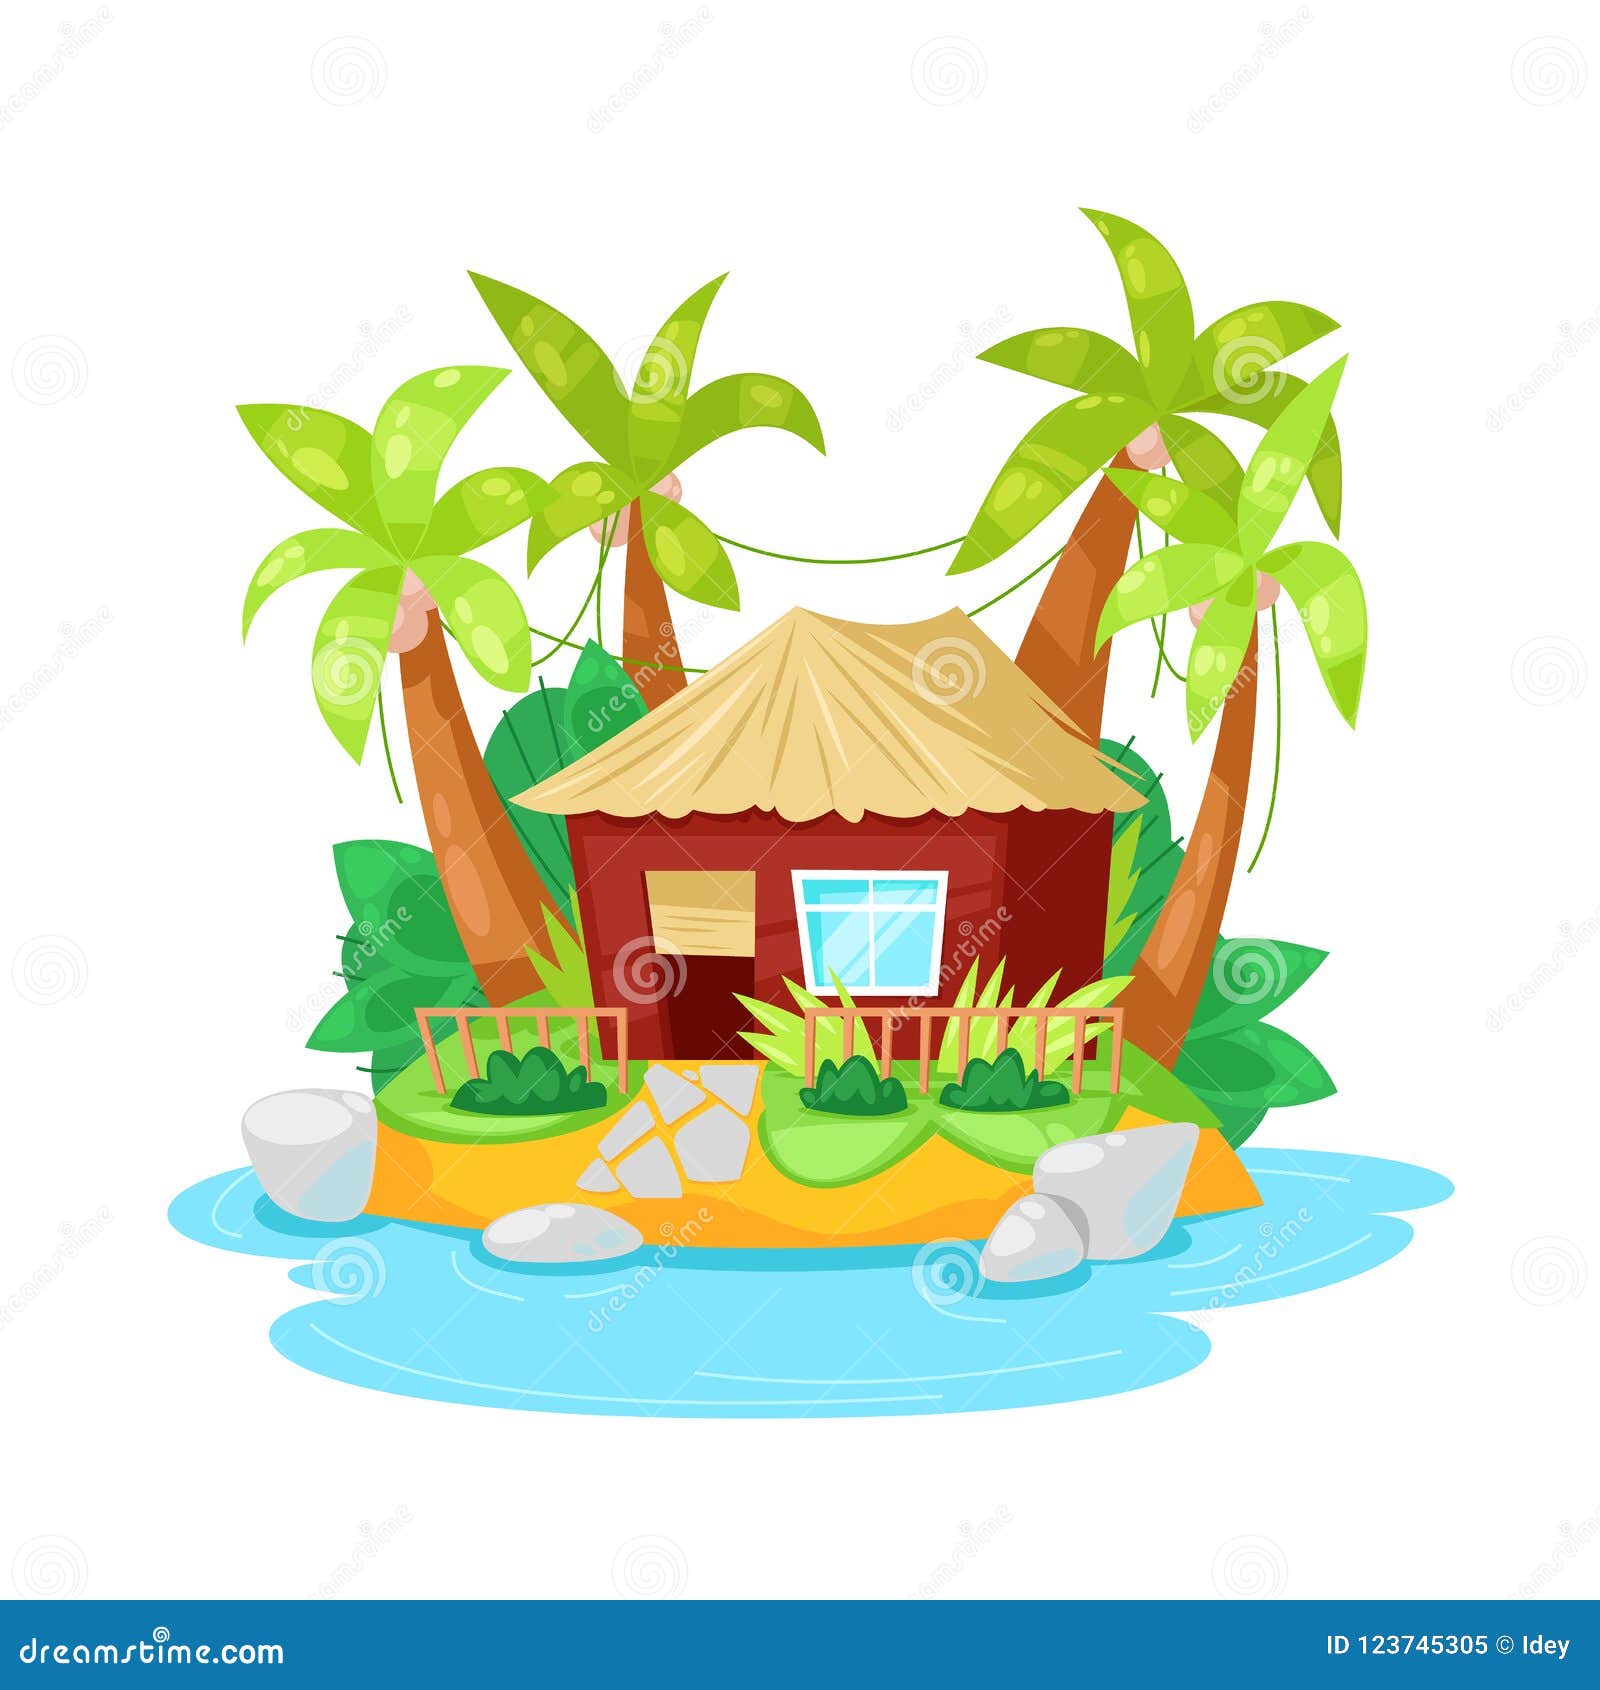 Tropical Island In Ocean With Palm Trees And Bungalow Hut. Cartoon ...